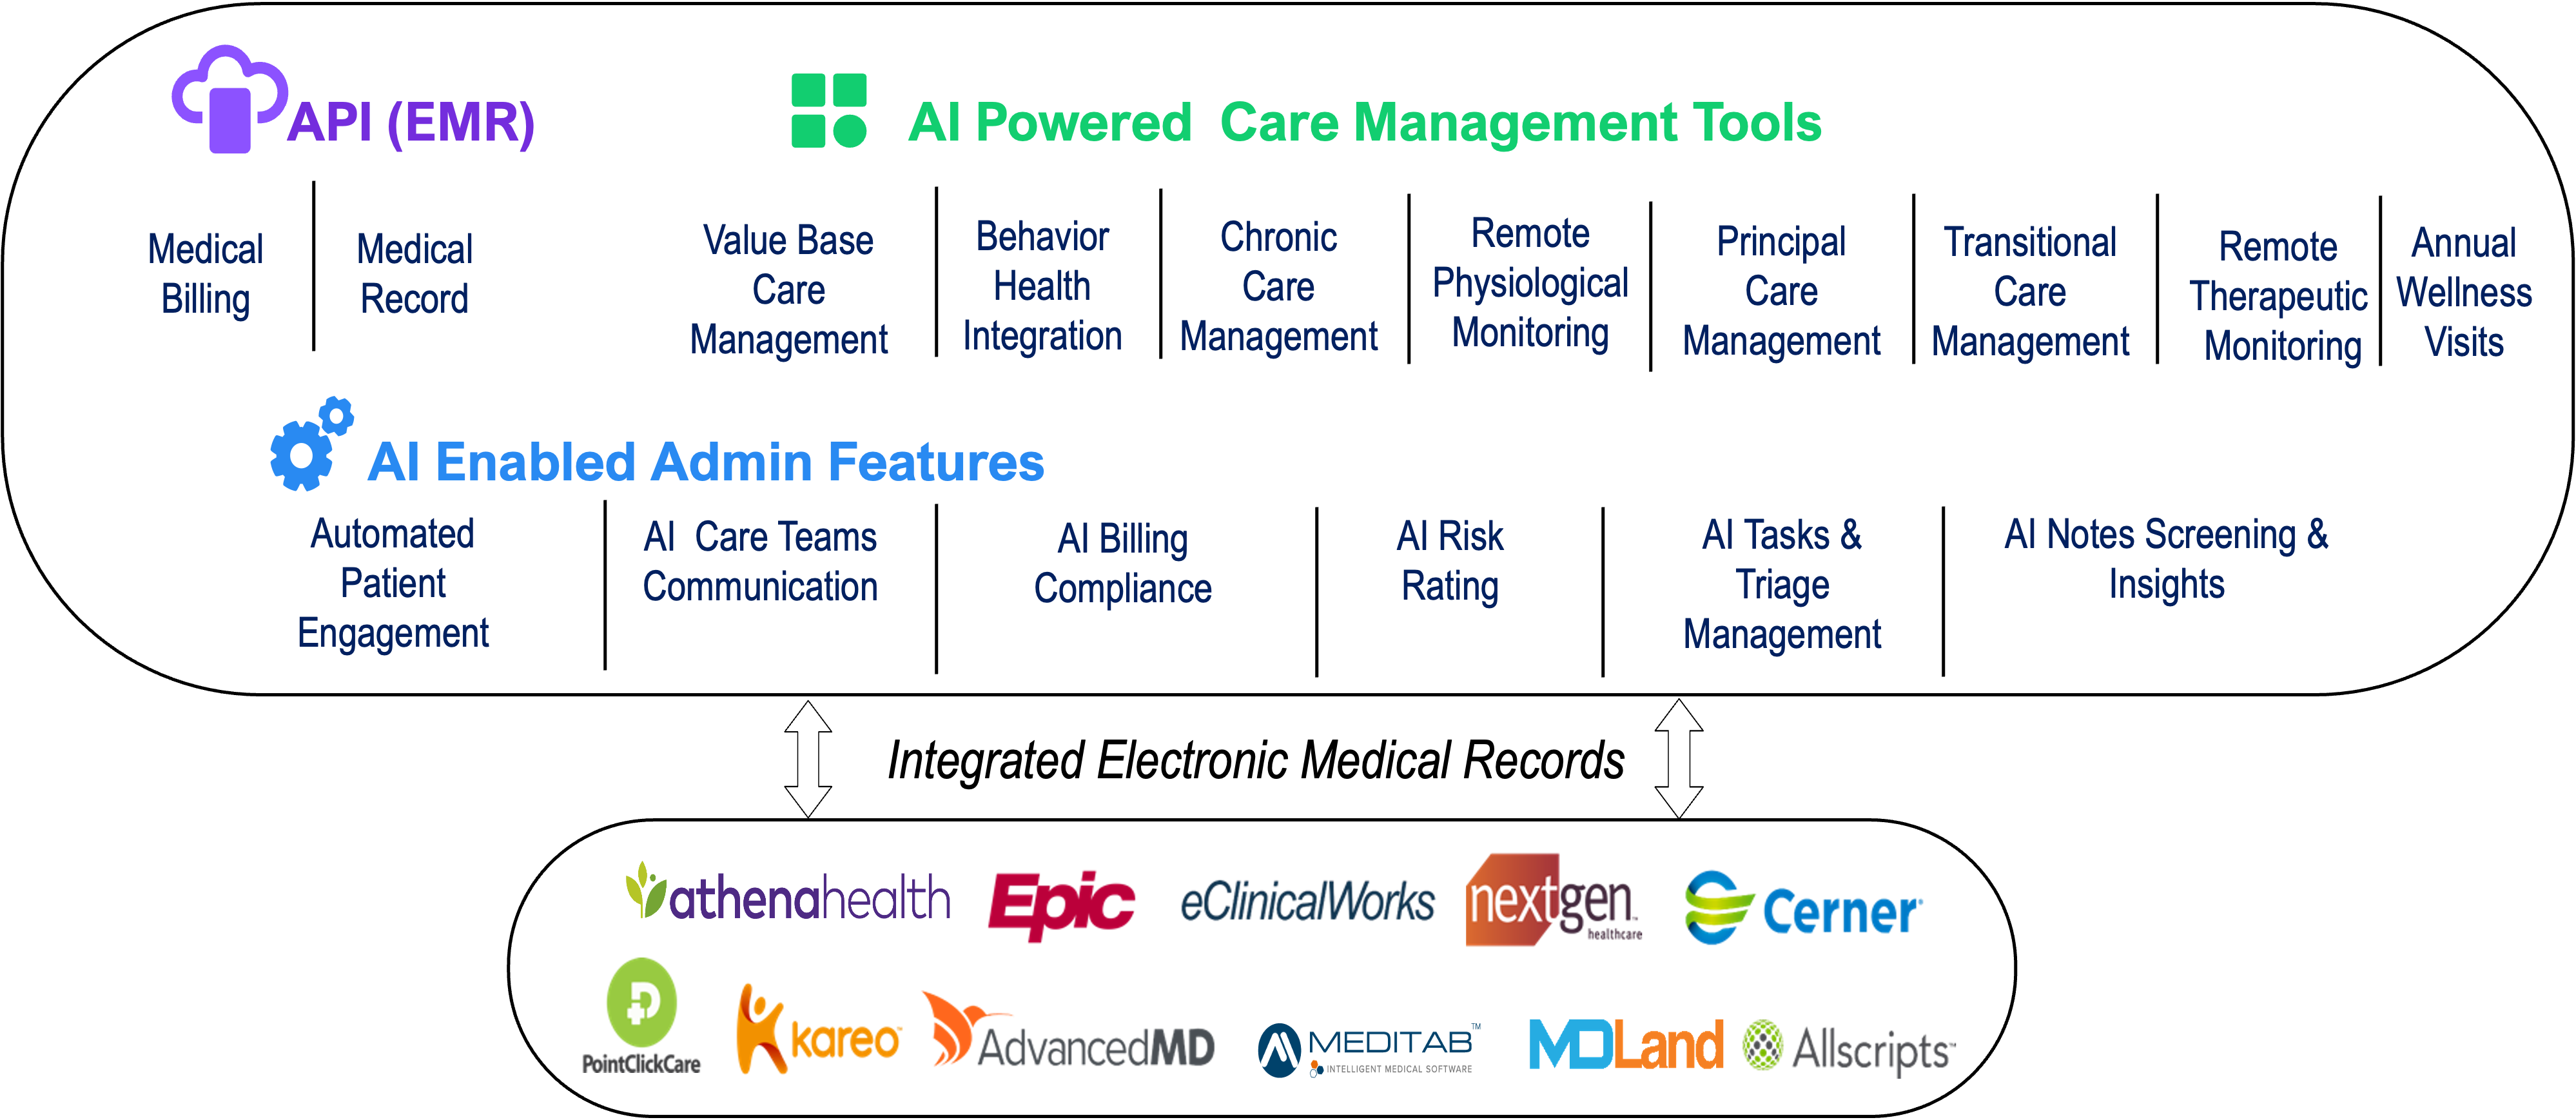 AI Powered Core Management Tools graphic